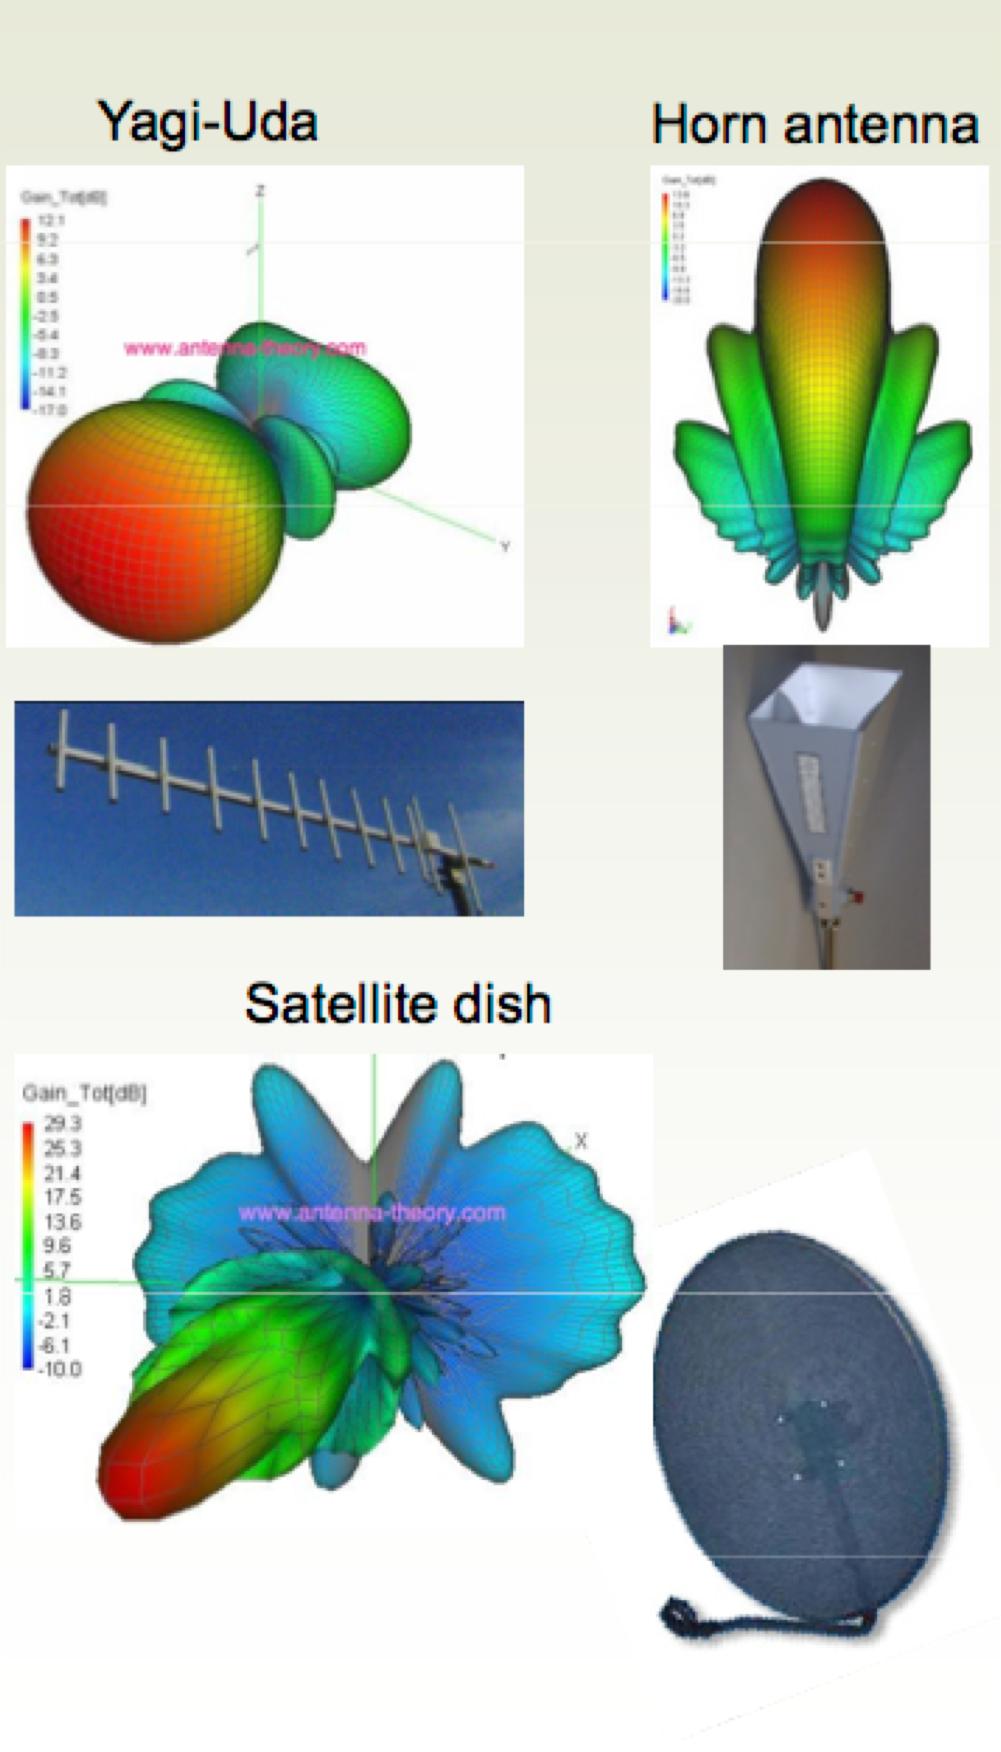 Antenna Gain Antennas don t radiate power equally in all directions Specific to the antenna design Model these